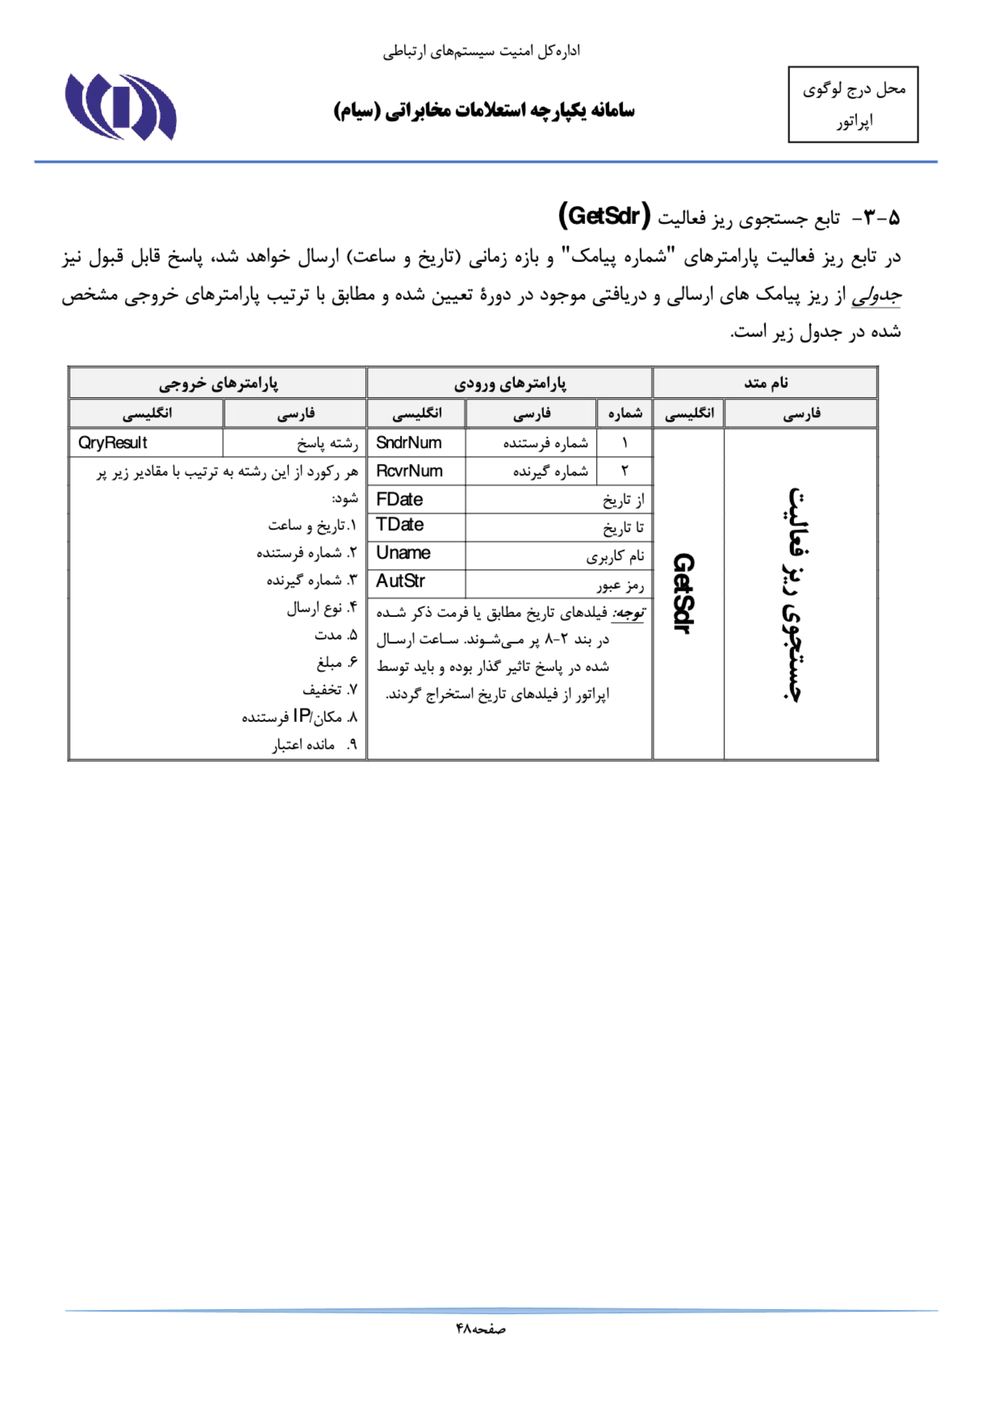 Page 48 from Iran’s SIAM Manual in Persian for Tracking and Controlling Mobile Phones